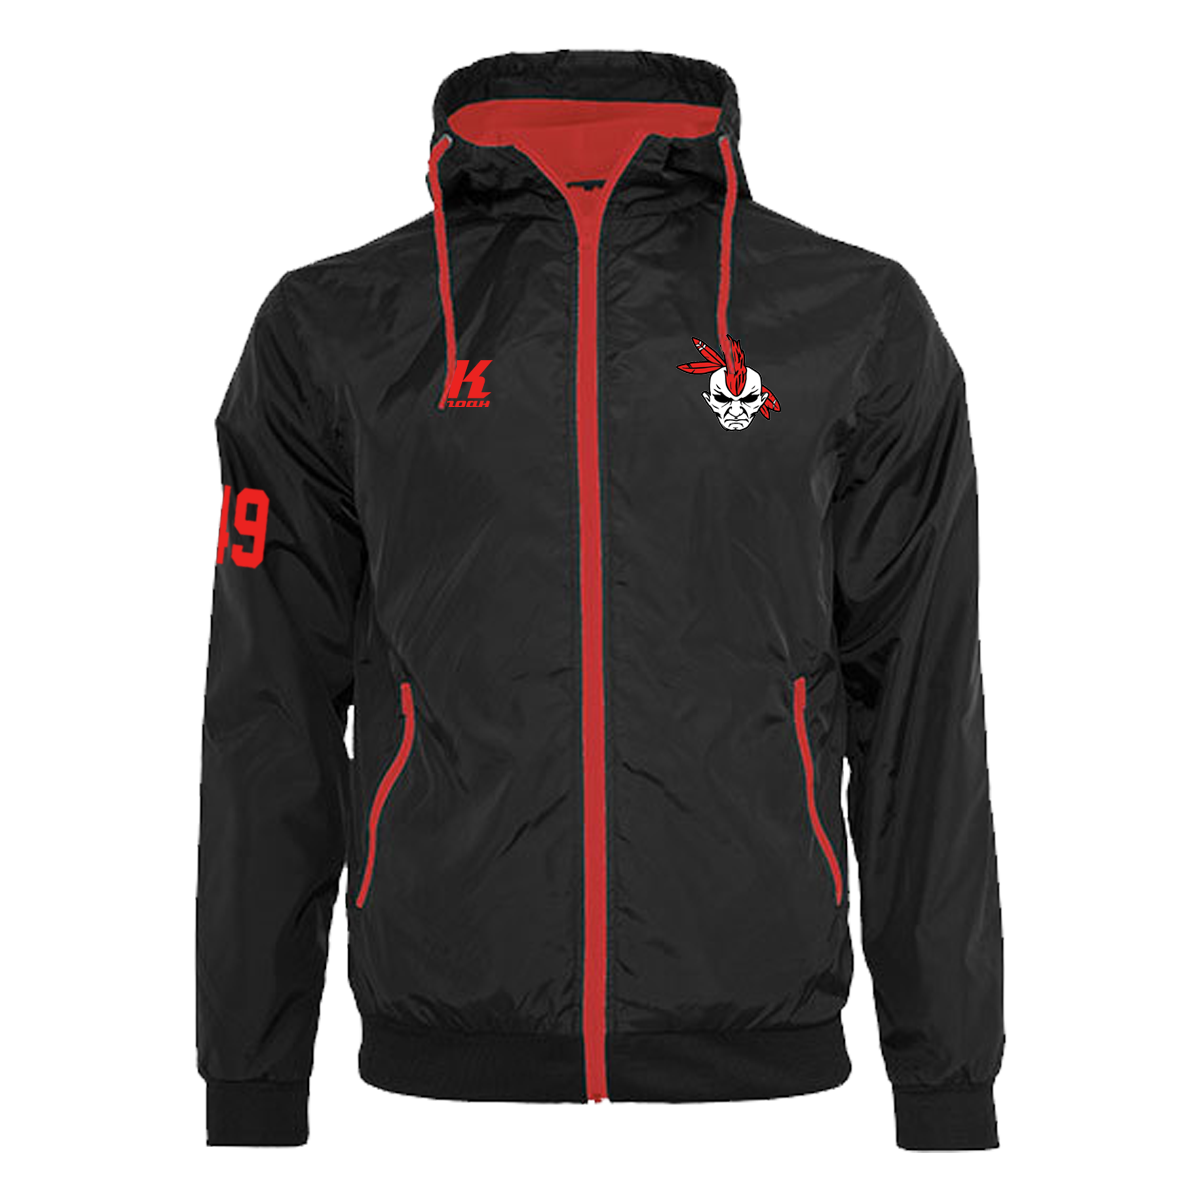 Warriors Windrunner Jacket black/red with Playernumber/Initials